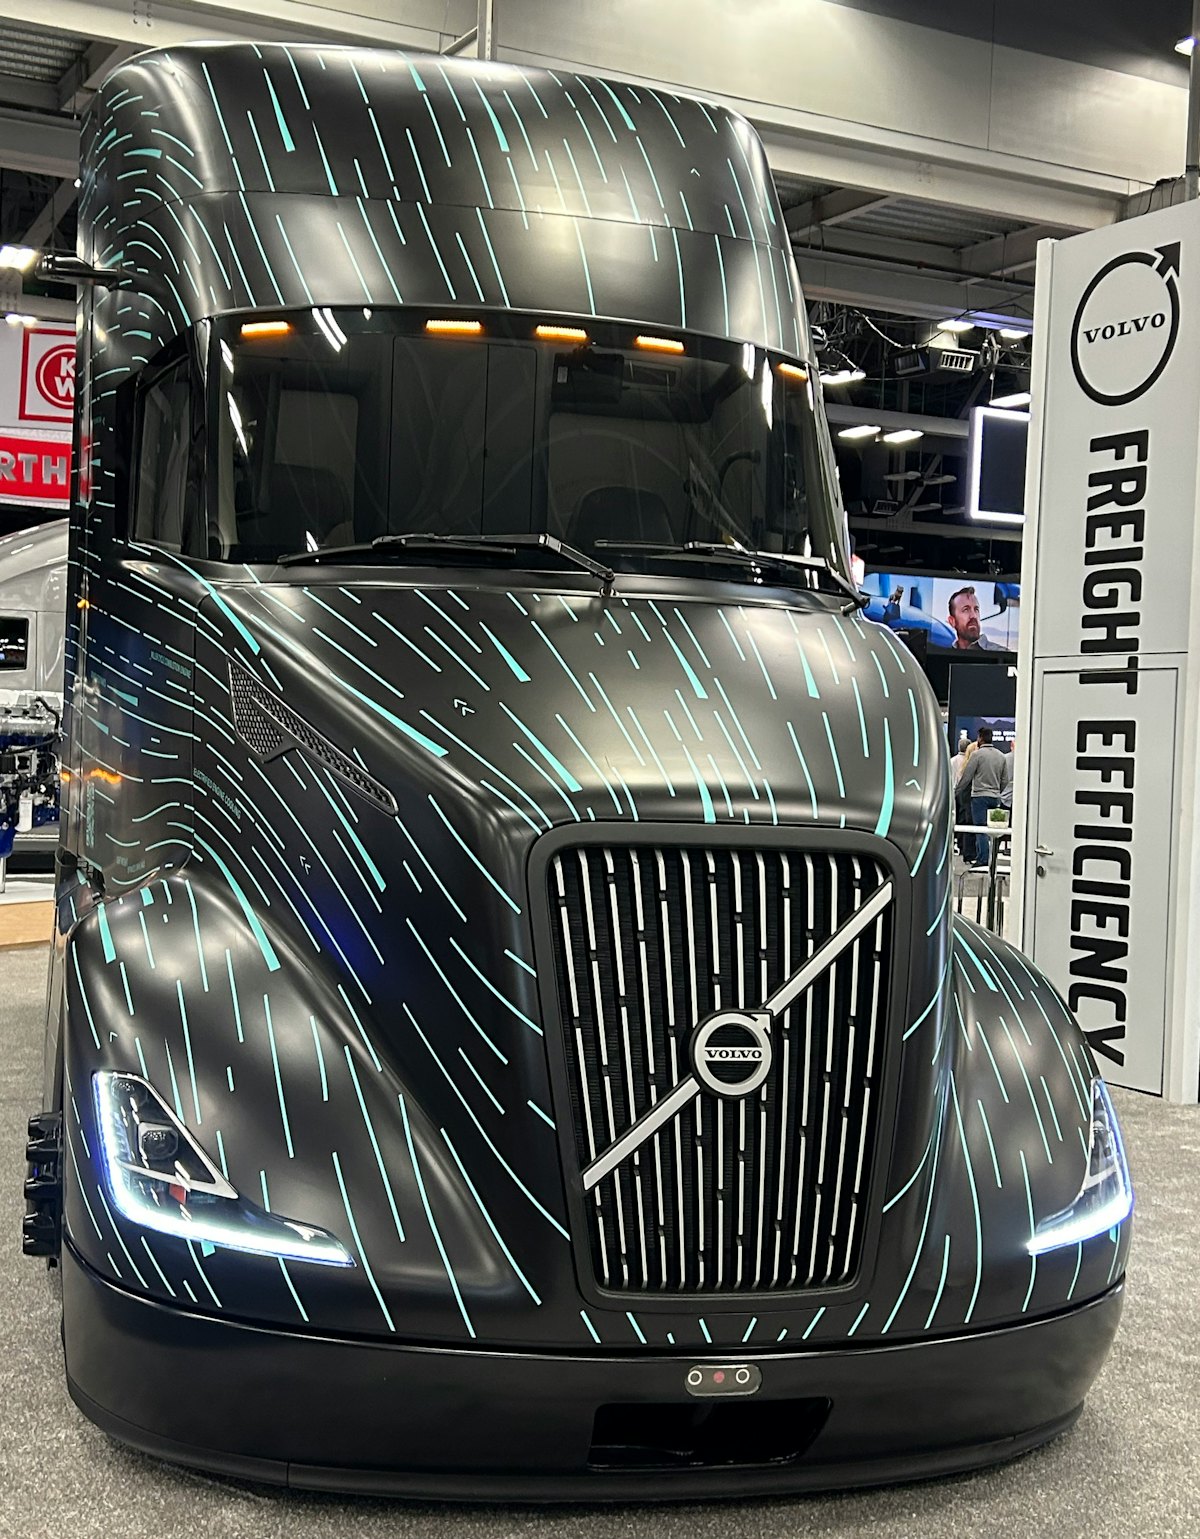 SuperTruck led to real-world truck gains, and more are coming - Truck News